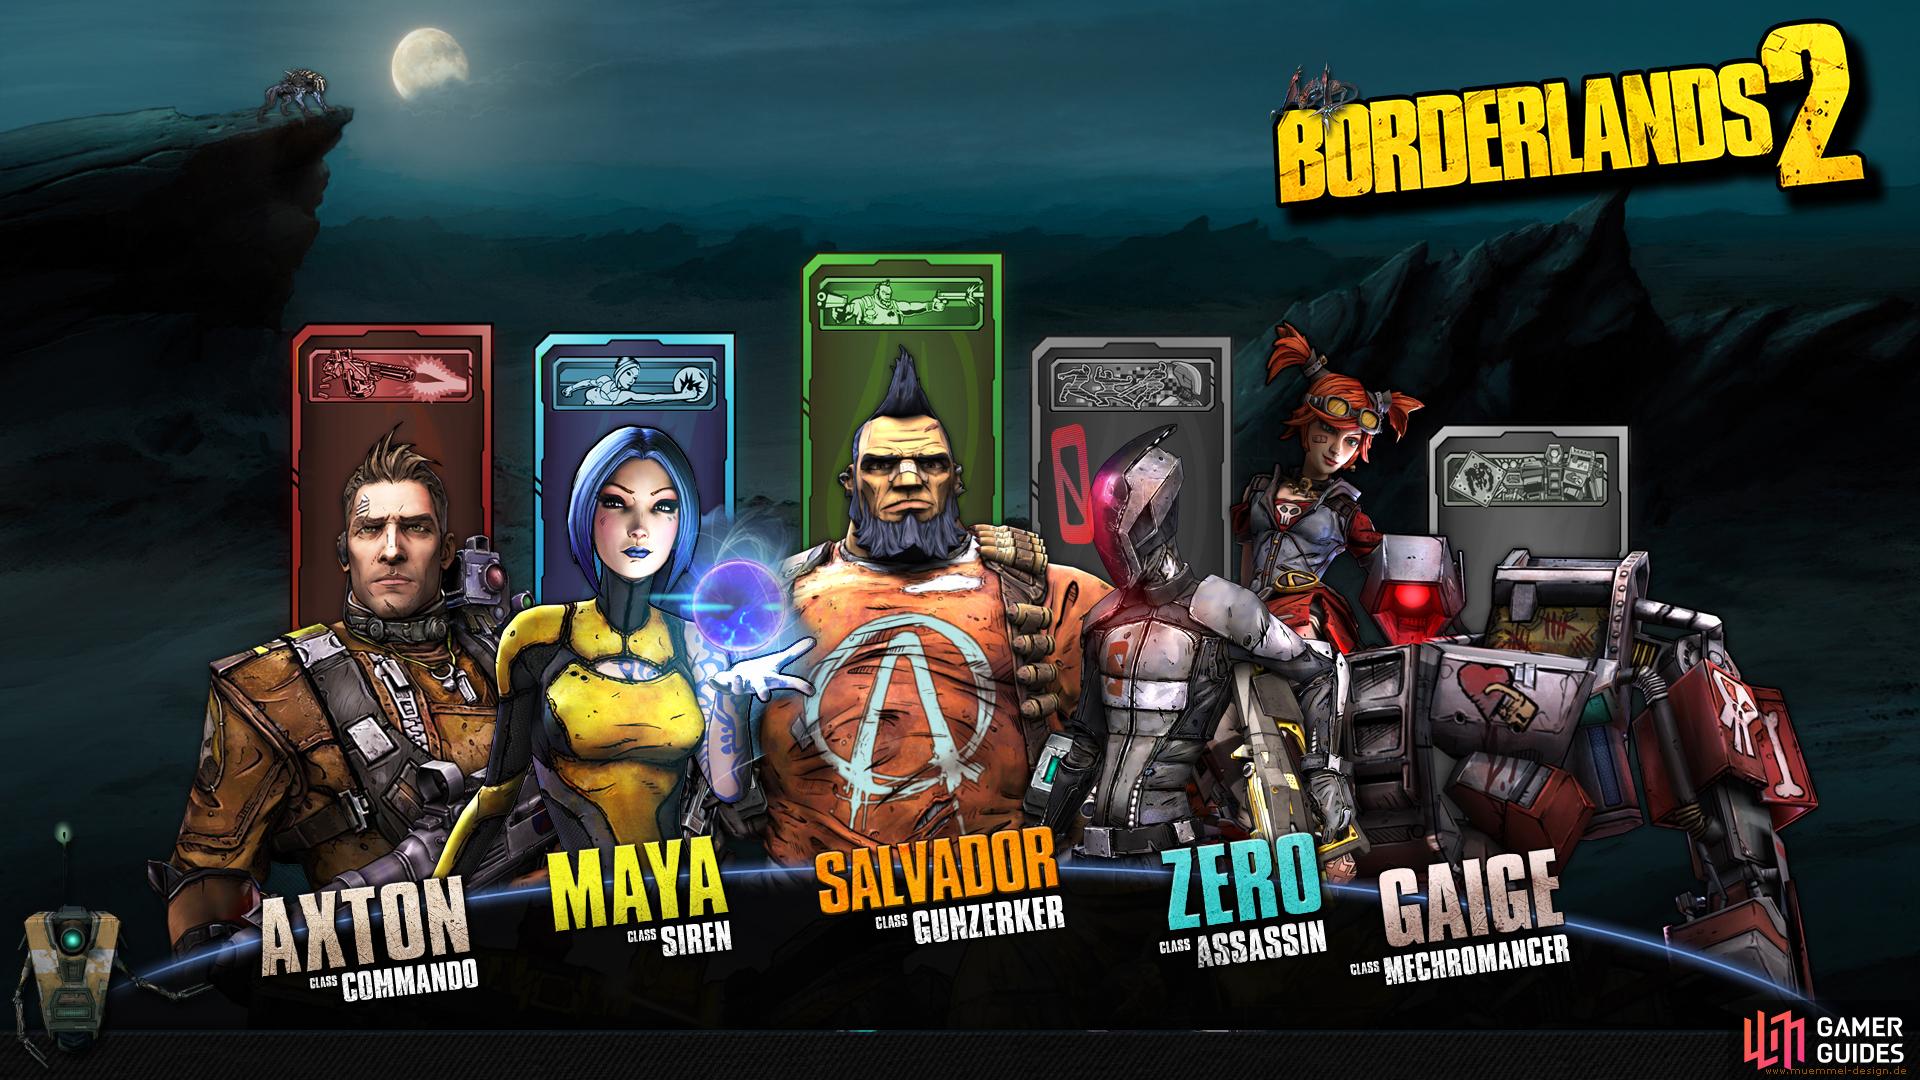 The characters of Borderlands 2.